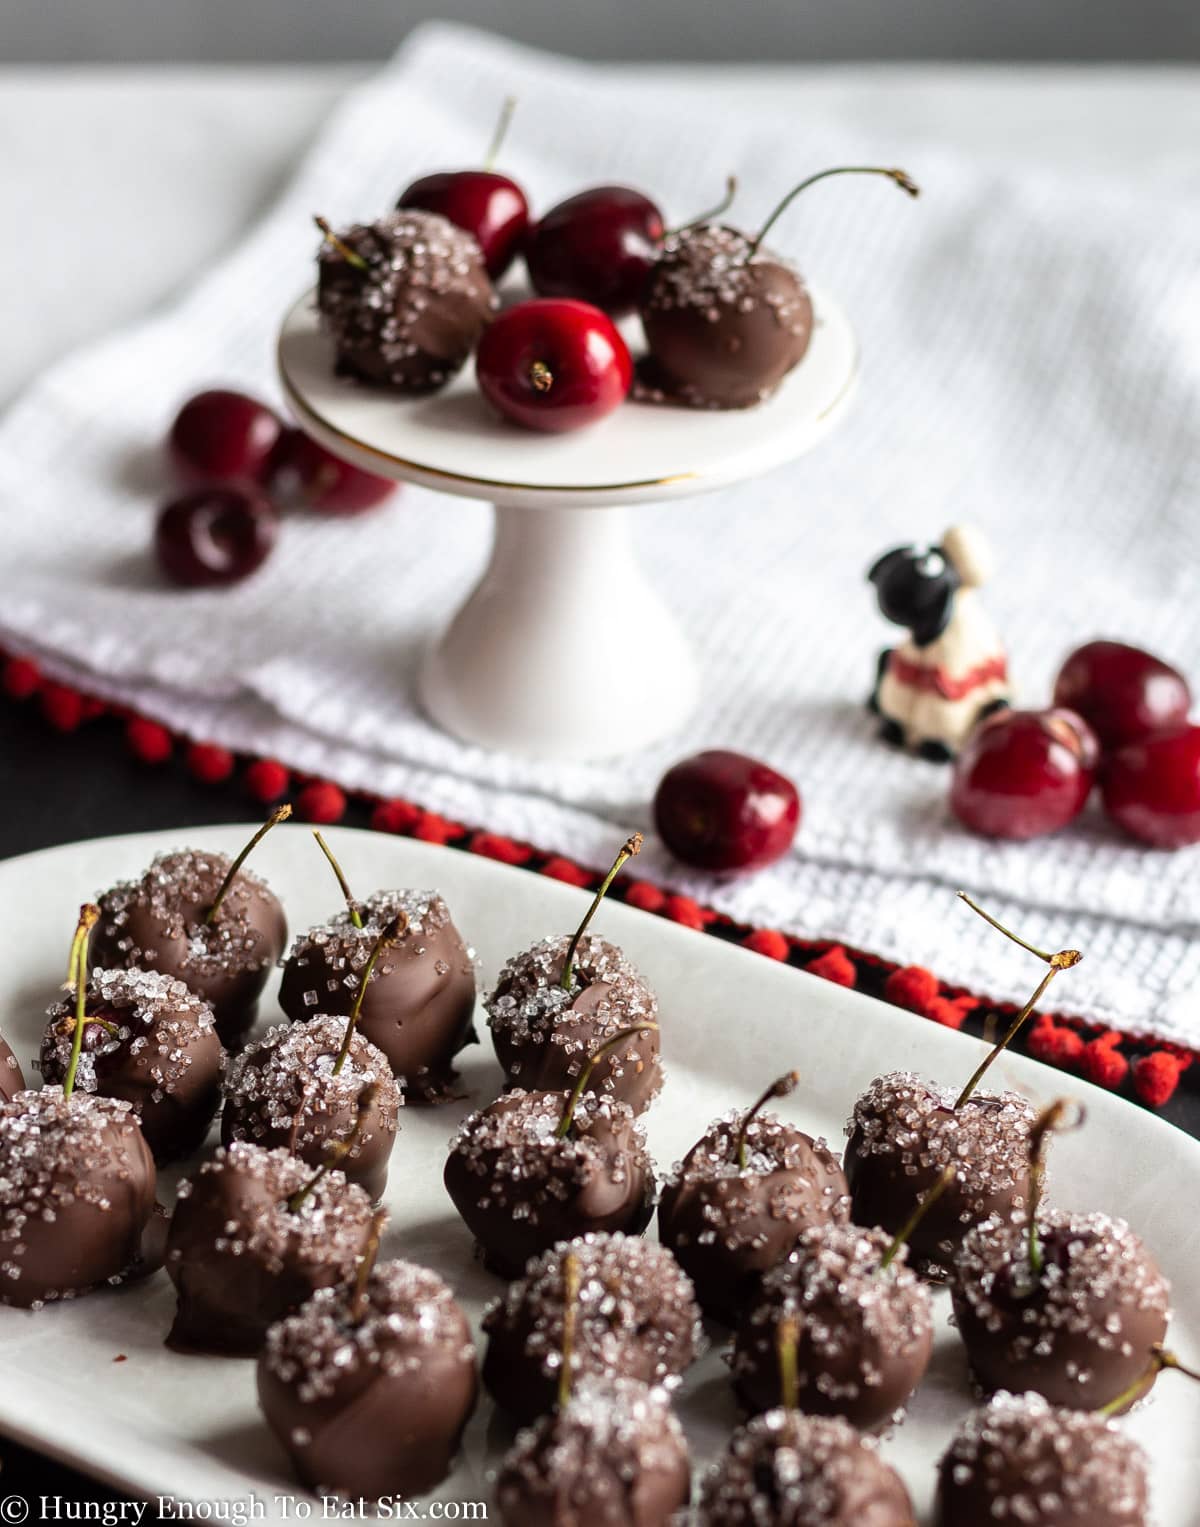 Chocolate and sugar covered cherries on a white platter and pedestal.